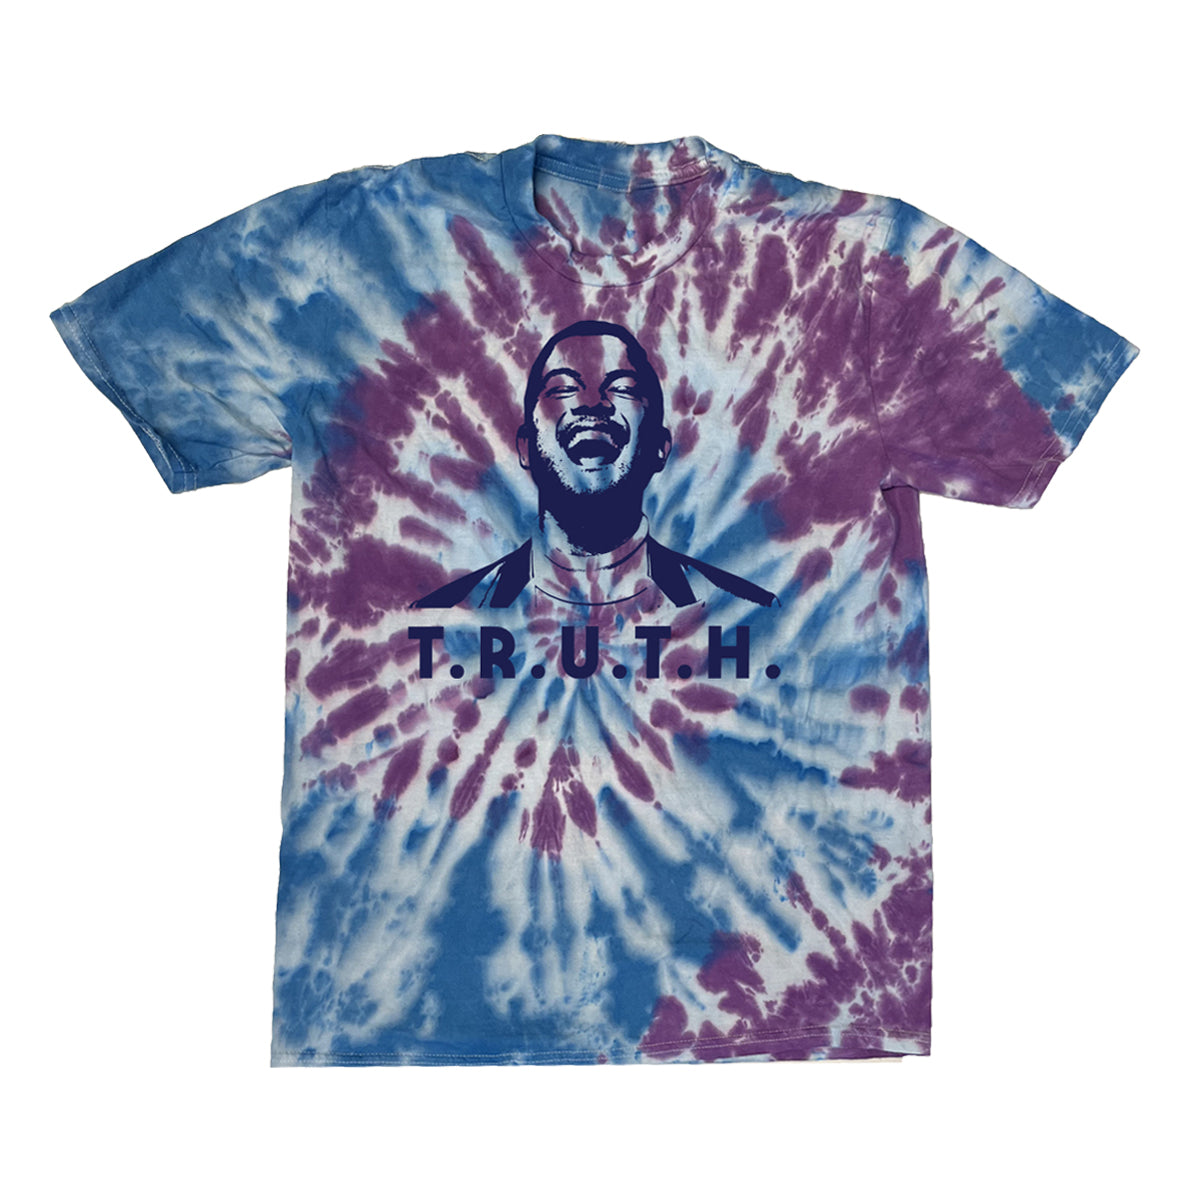 Blue, purple and white tie dye t-shirt in spiral pattern with navy blue print of Guy Sebastians face and TRUTH underneath